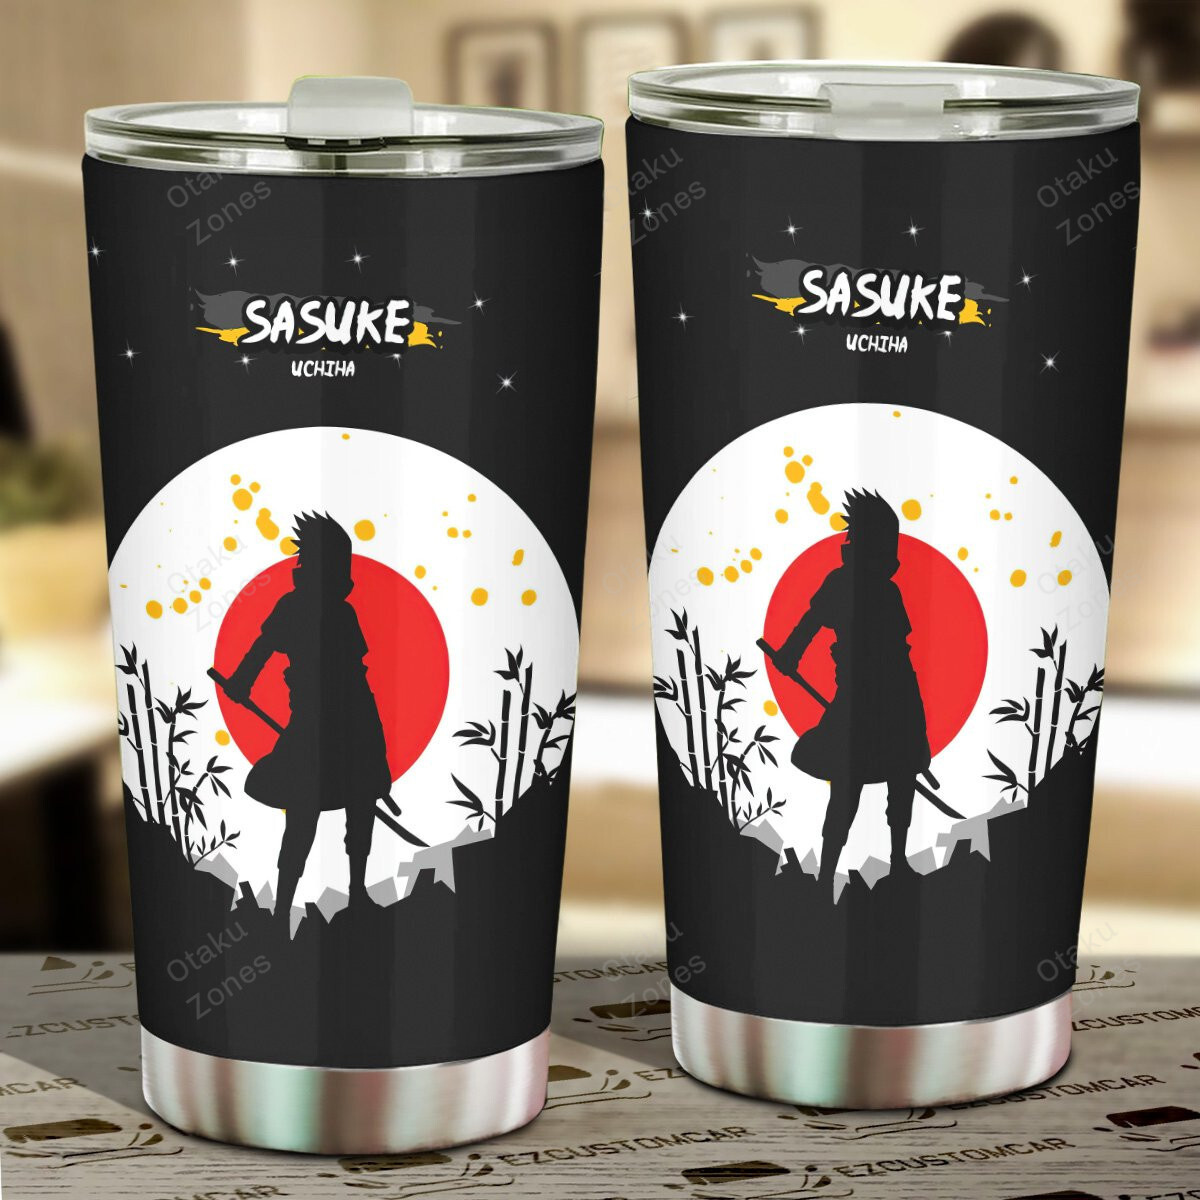 Go ahead and order your new tumbler now! 51